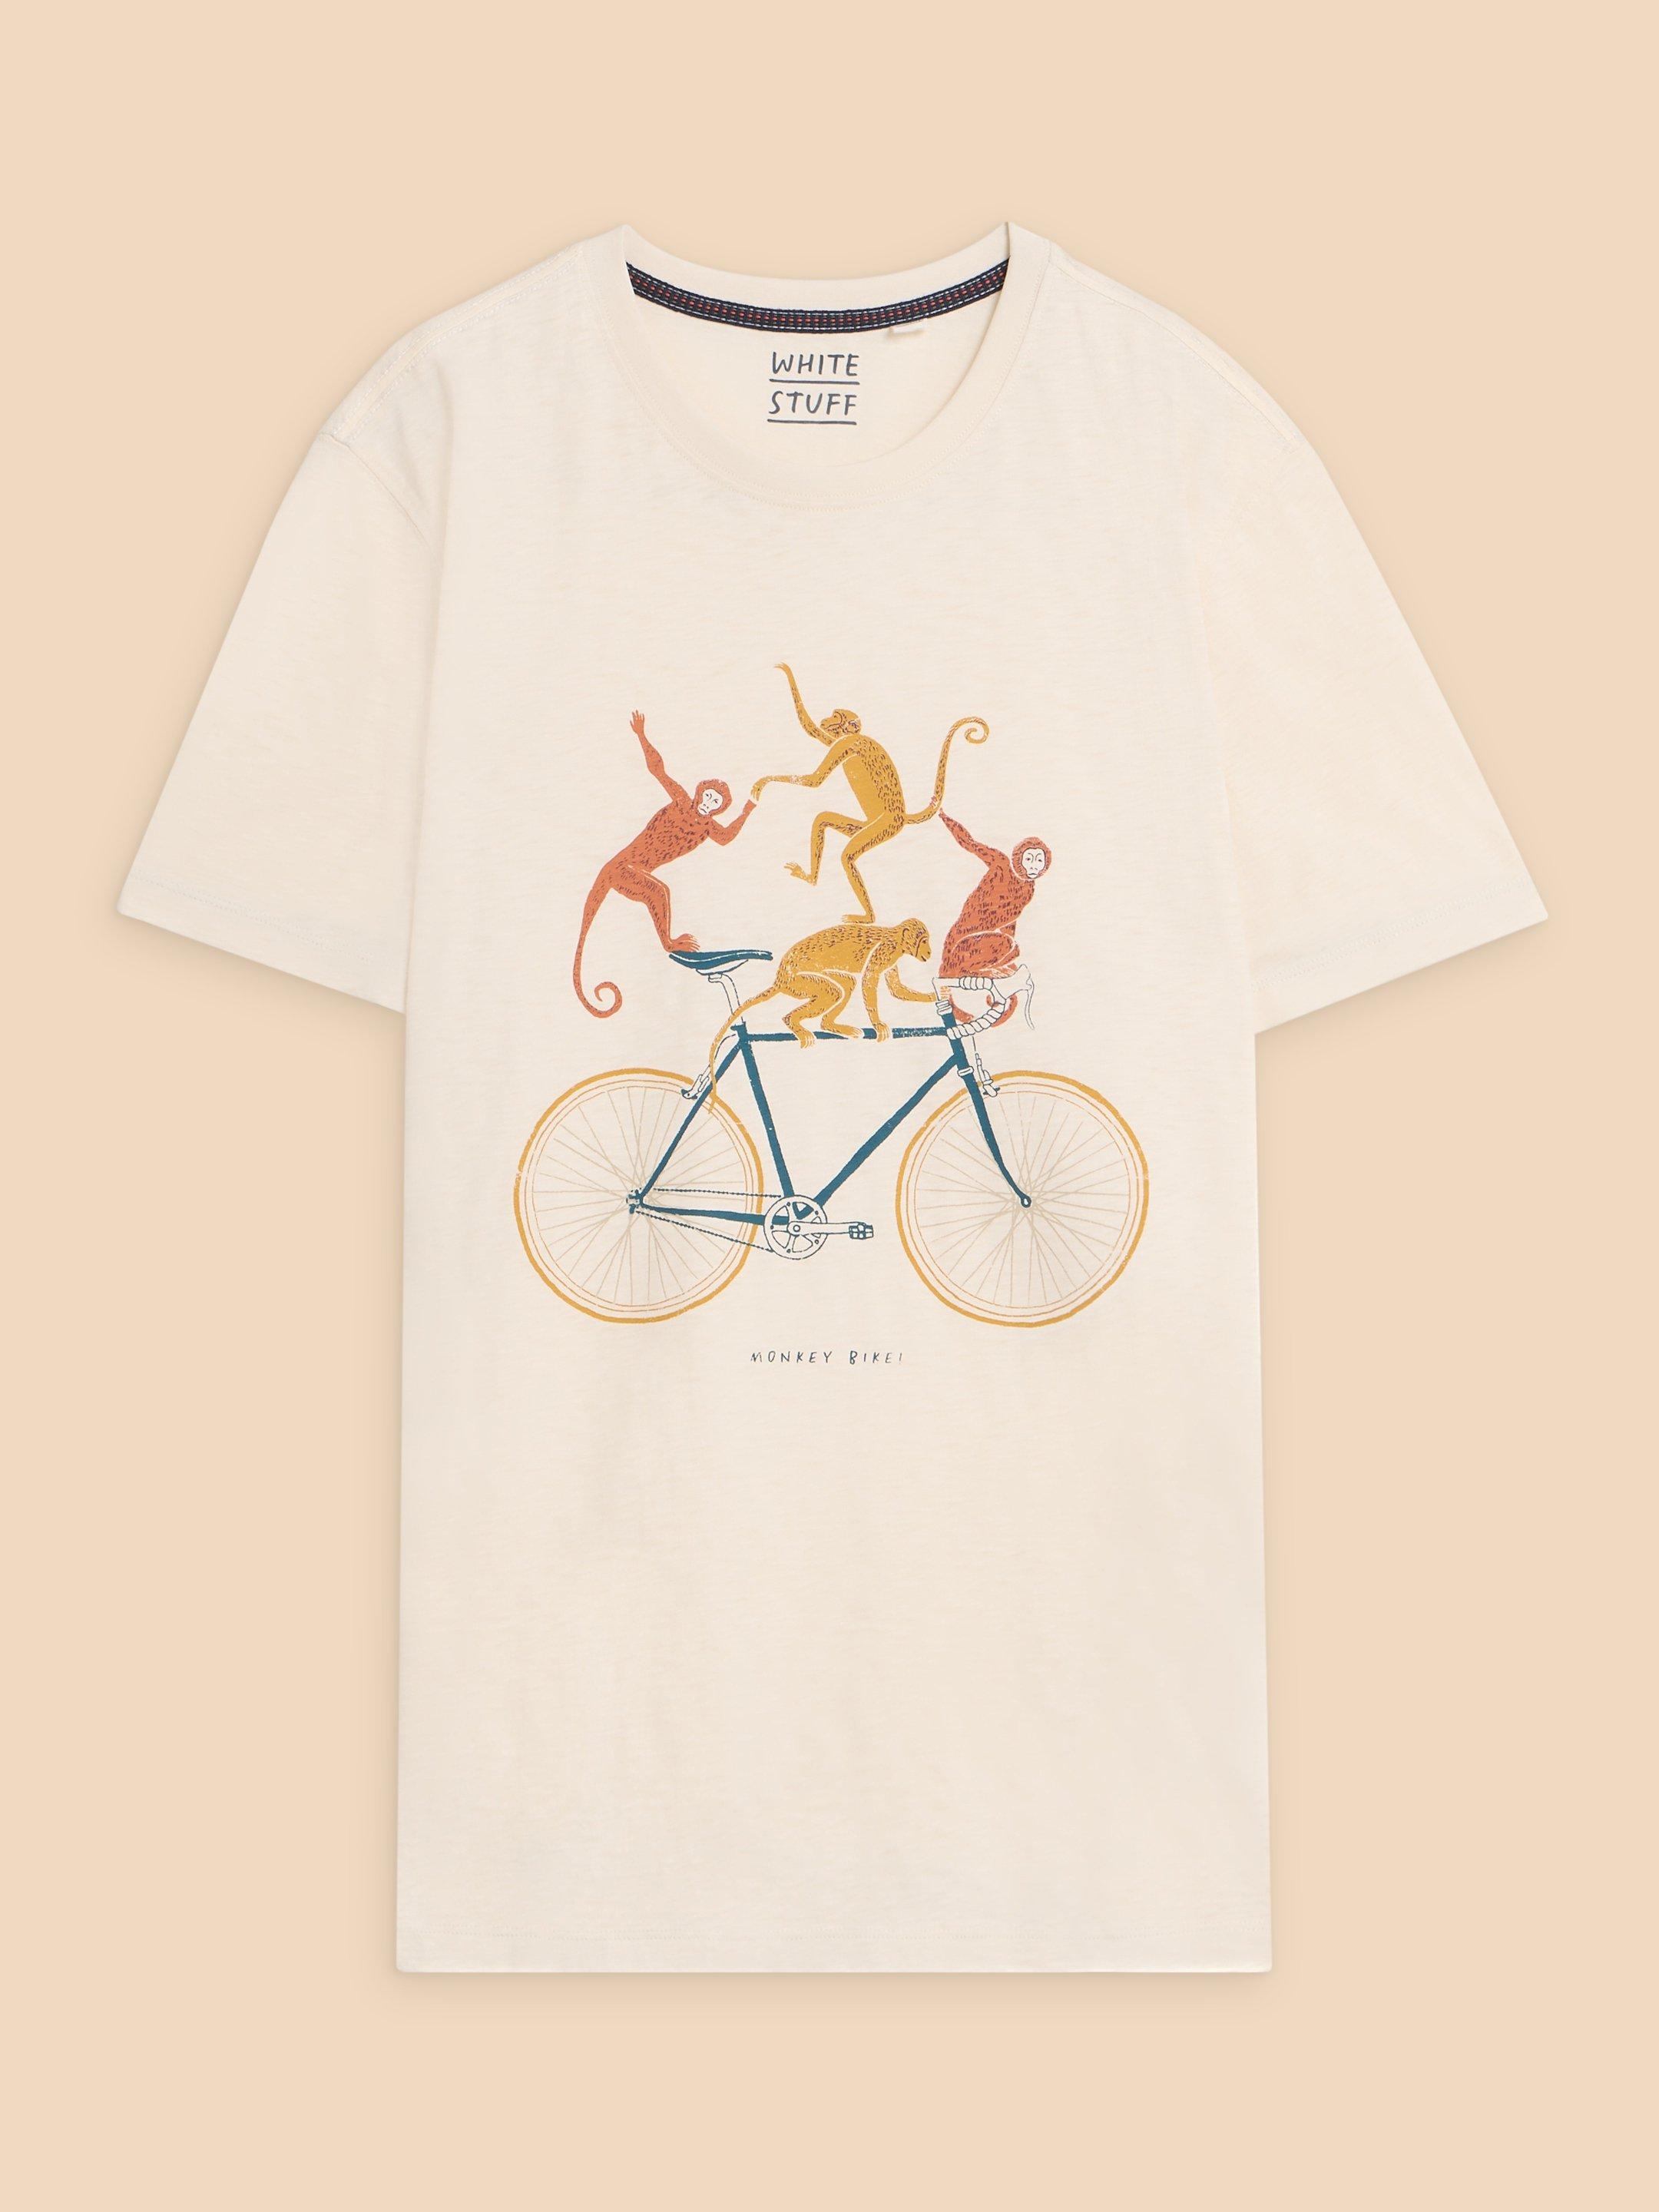 Monkey on a Bike Graphic Tee in WHITE PR - FLAT FRONT